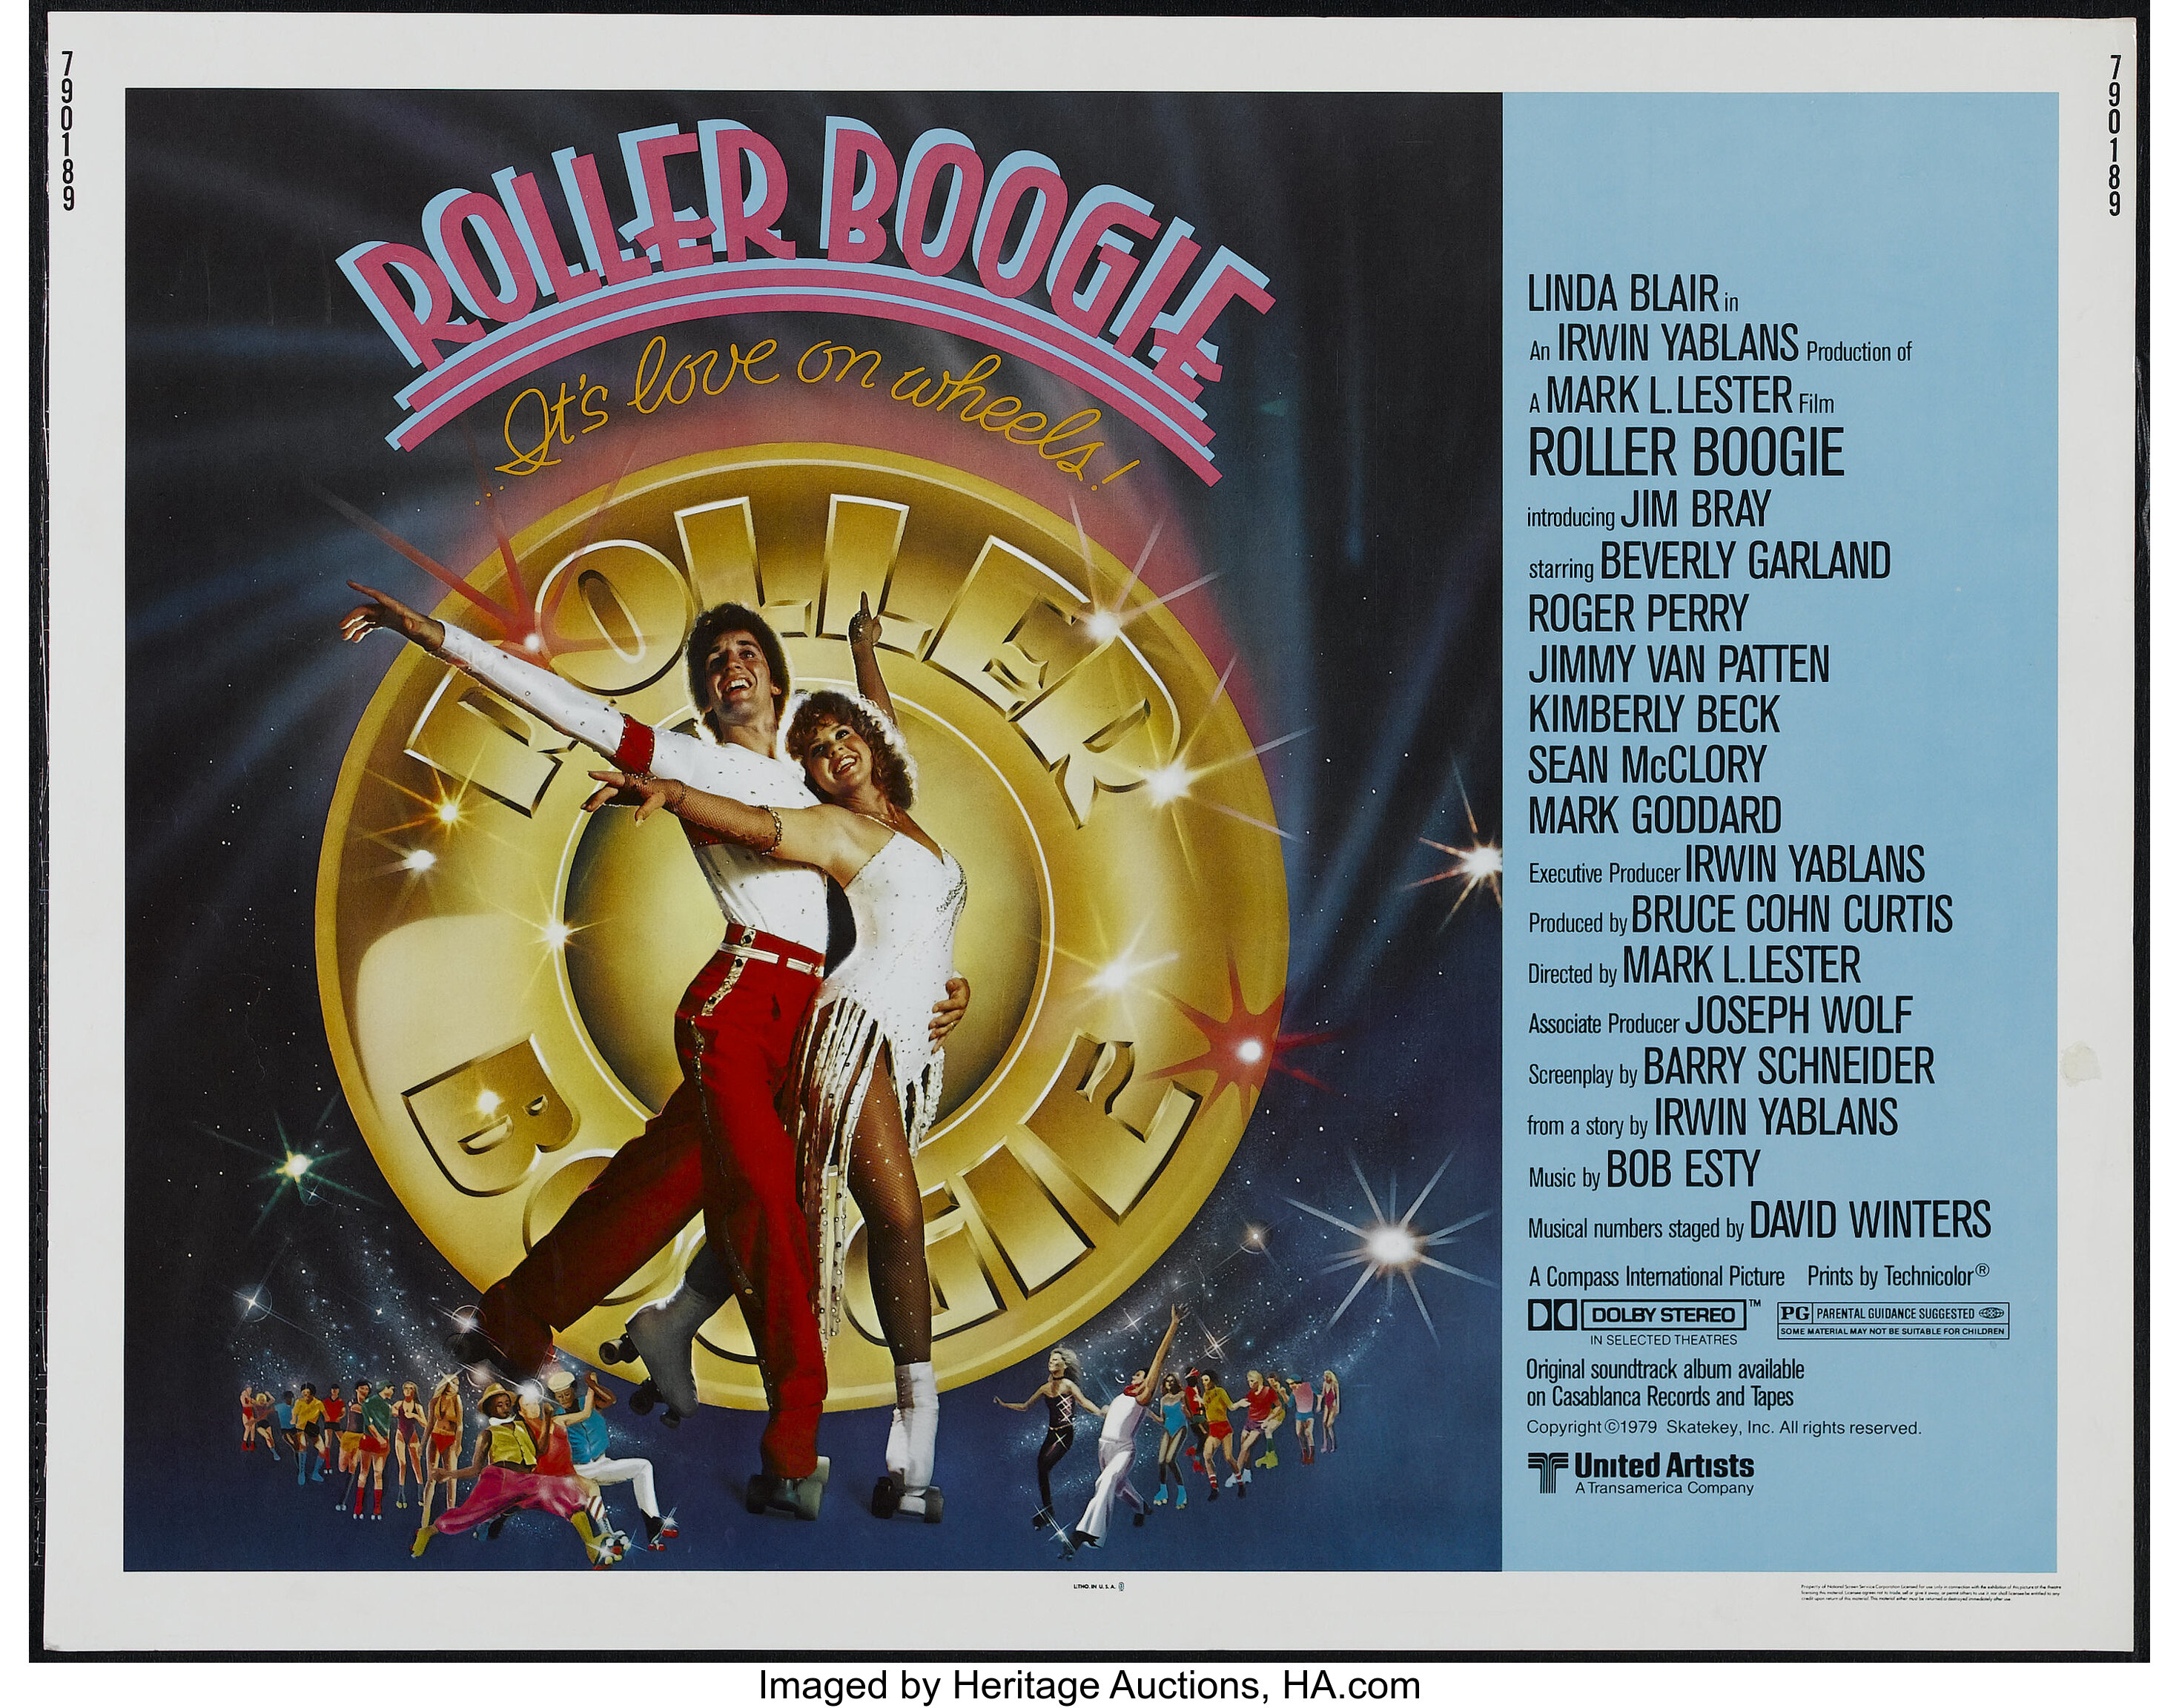 Roller Boogie United Artists 1979 Half Sheet 22 X 28 Lot 26216 Heritage Auctions